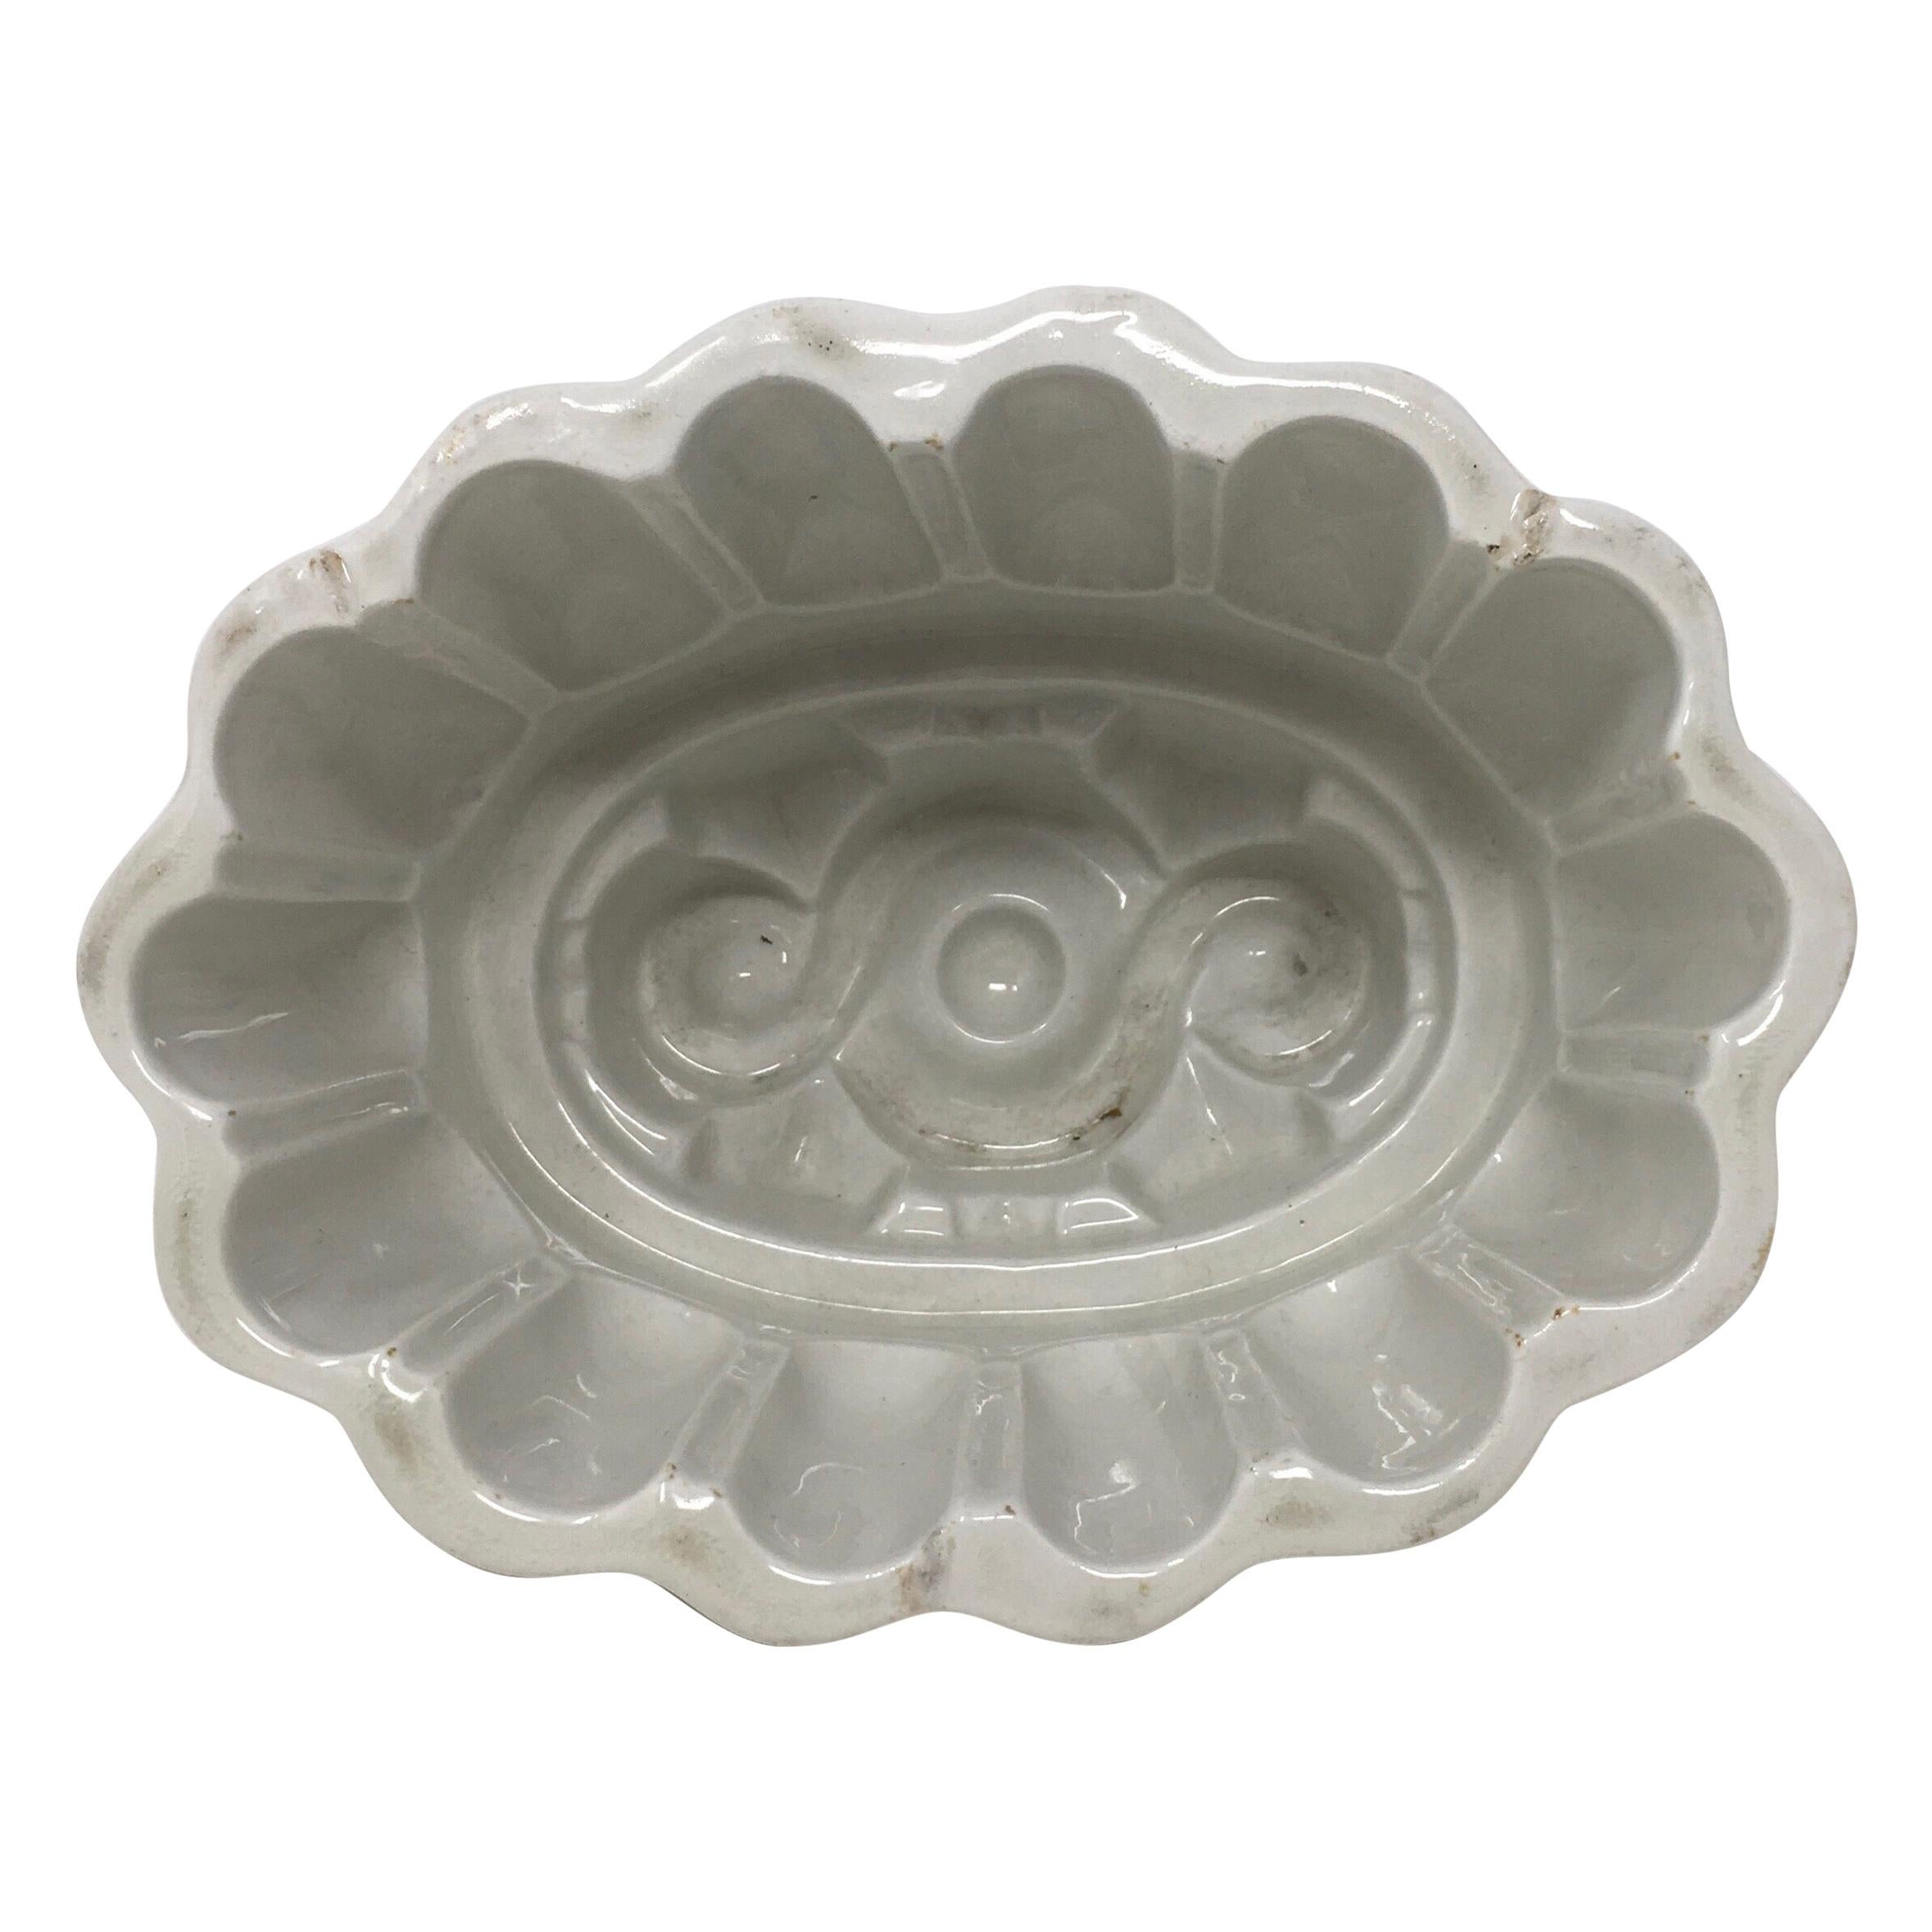 Victorian Jelly Mold